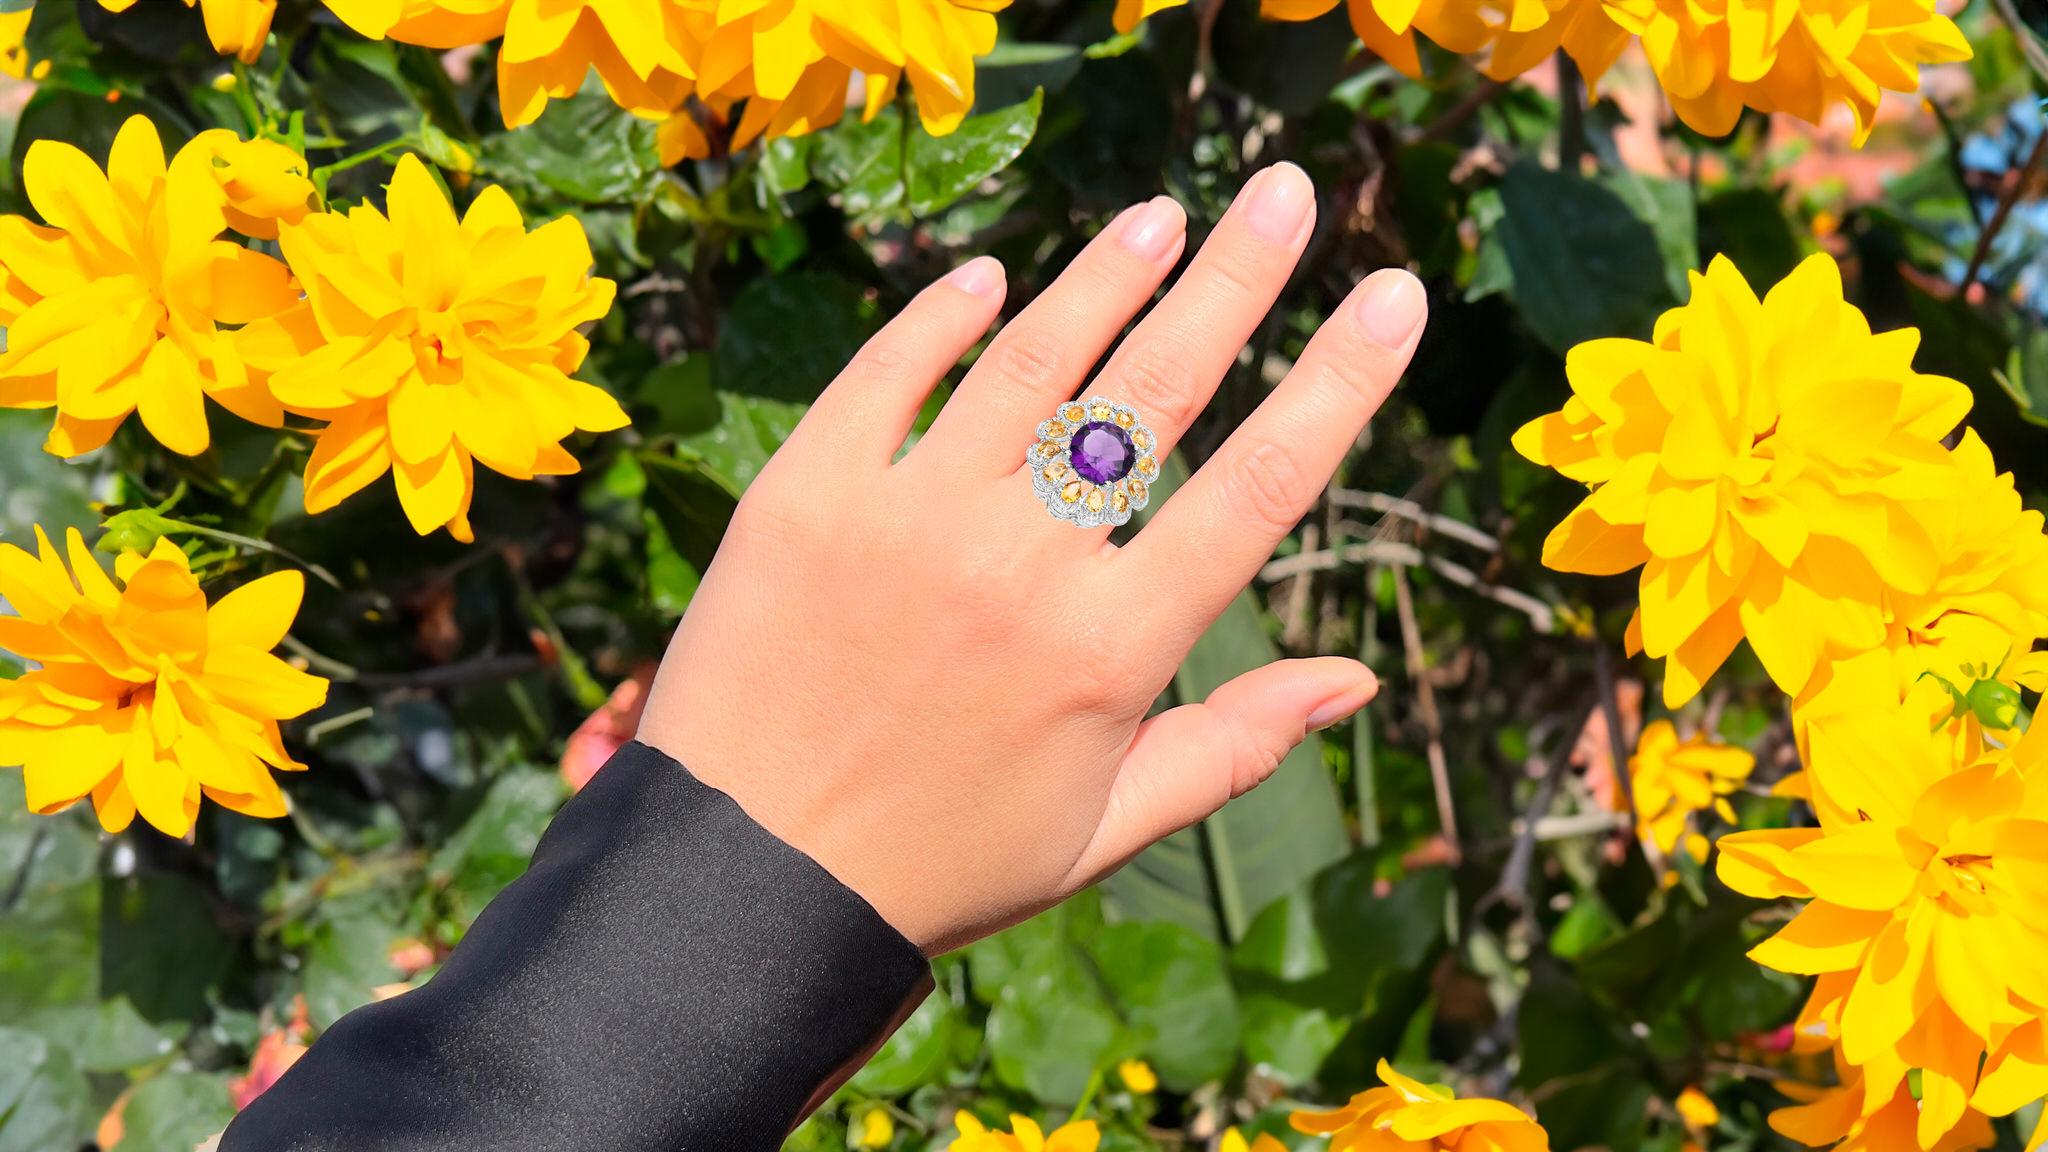 It comes with the appraisal by GIA GG/AJP
Madeira Citrine: 1.95 Carats
Cut: Pear
Amethyst = 3.45 Carats
Cut: Round
Metal: Sterling Silver
Rhodium Plated
Ring Size: 8* US
*It can be resized complimentary